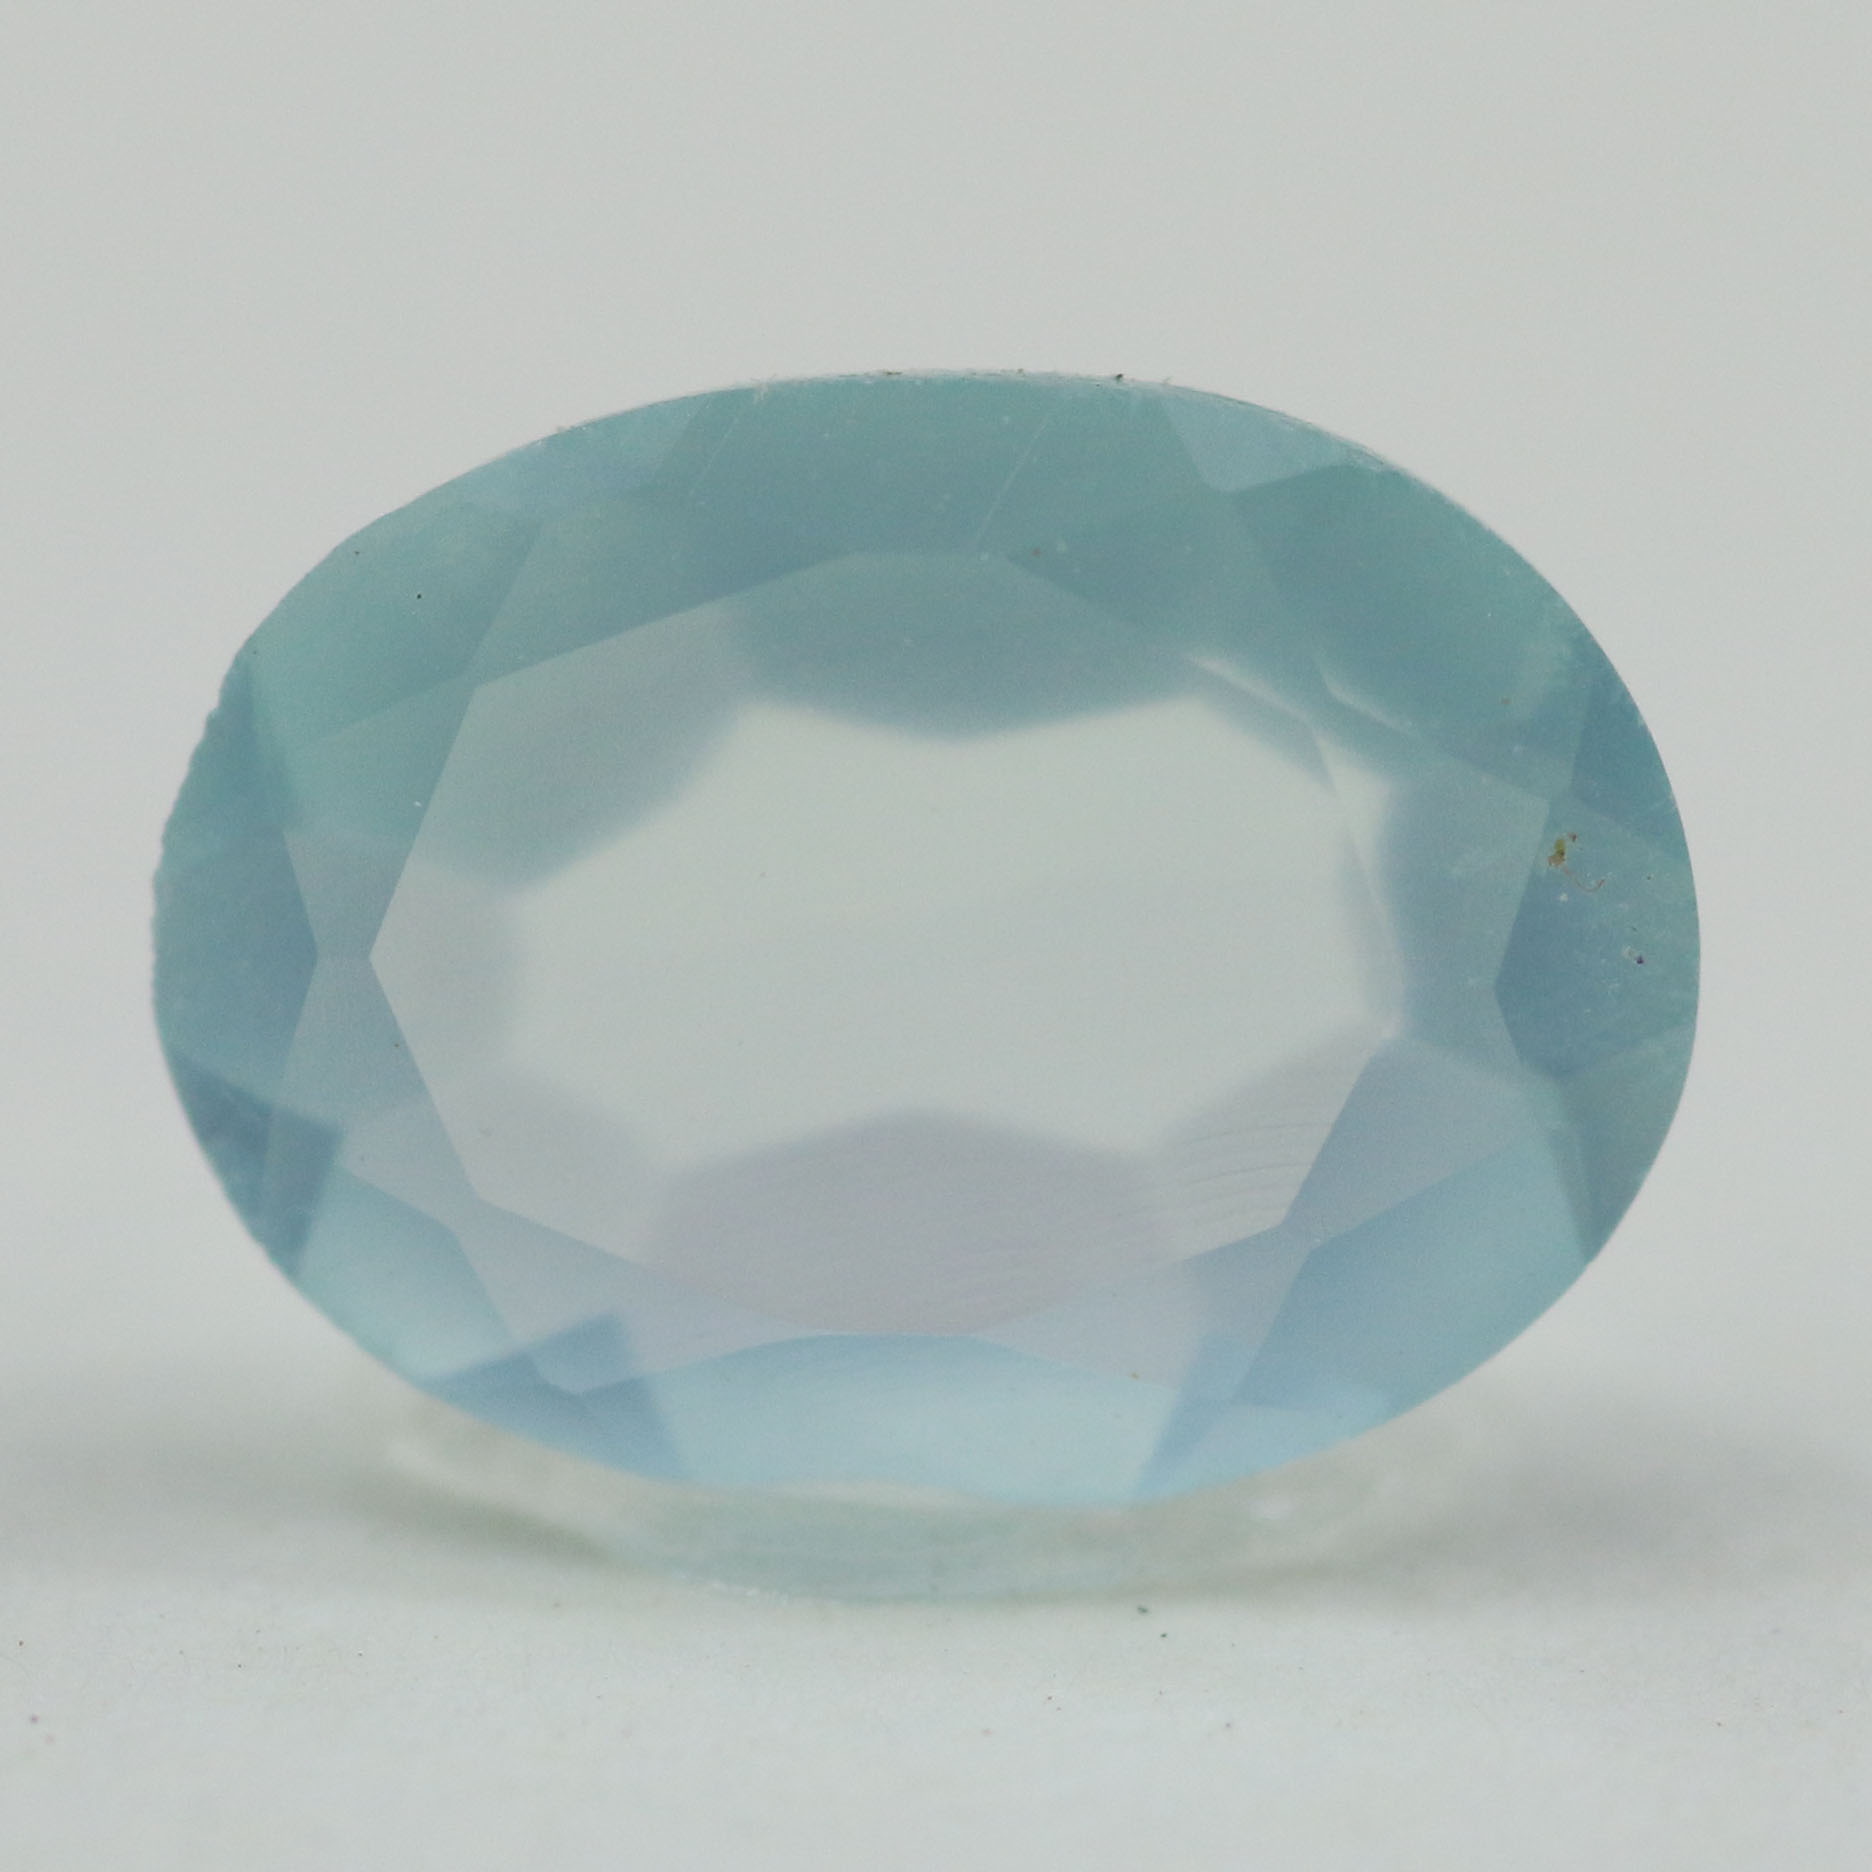 DYED SEA BLUE AGATE OVAL 7X5